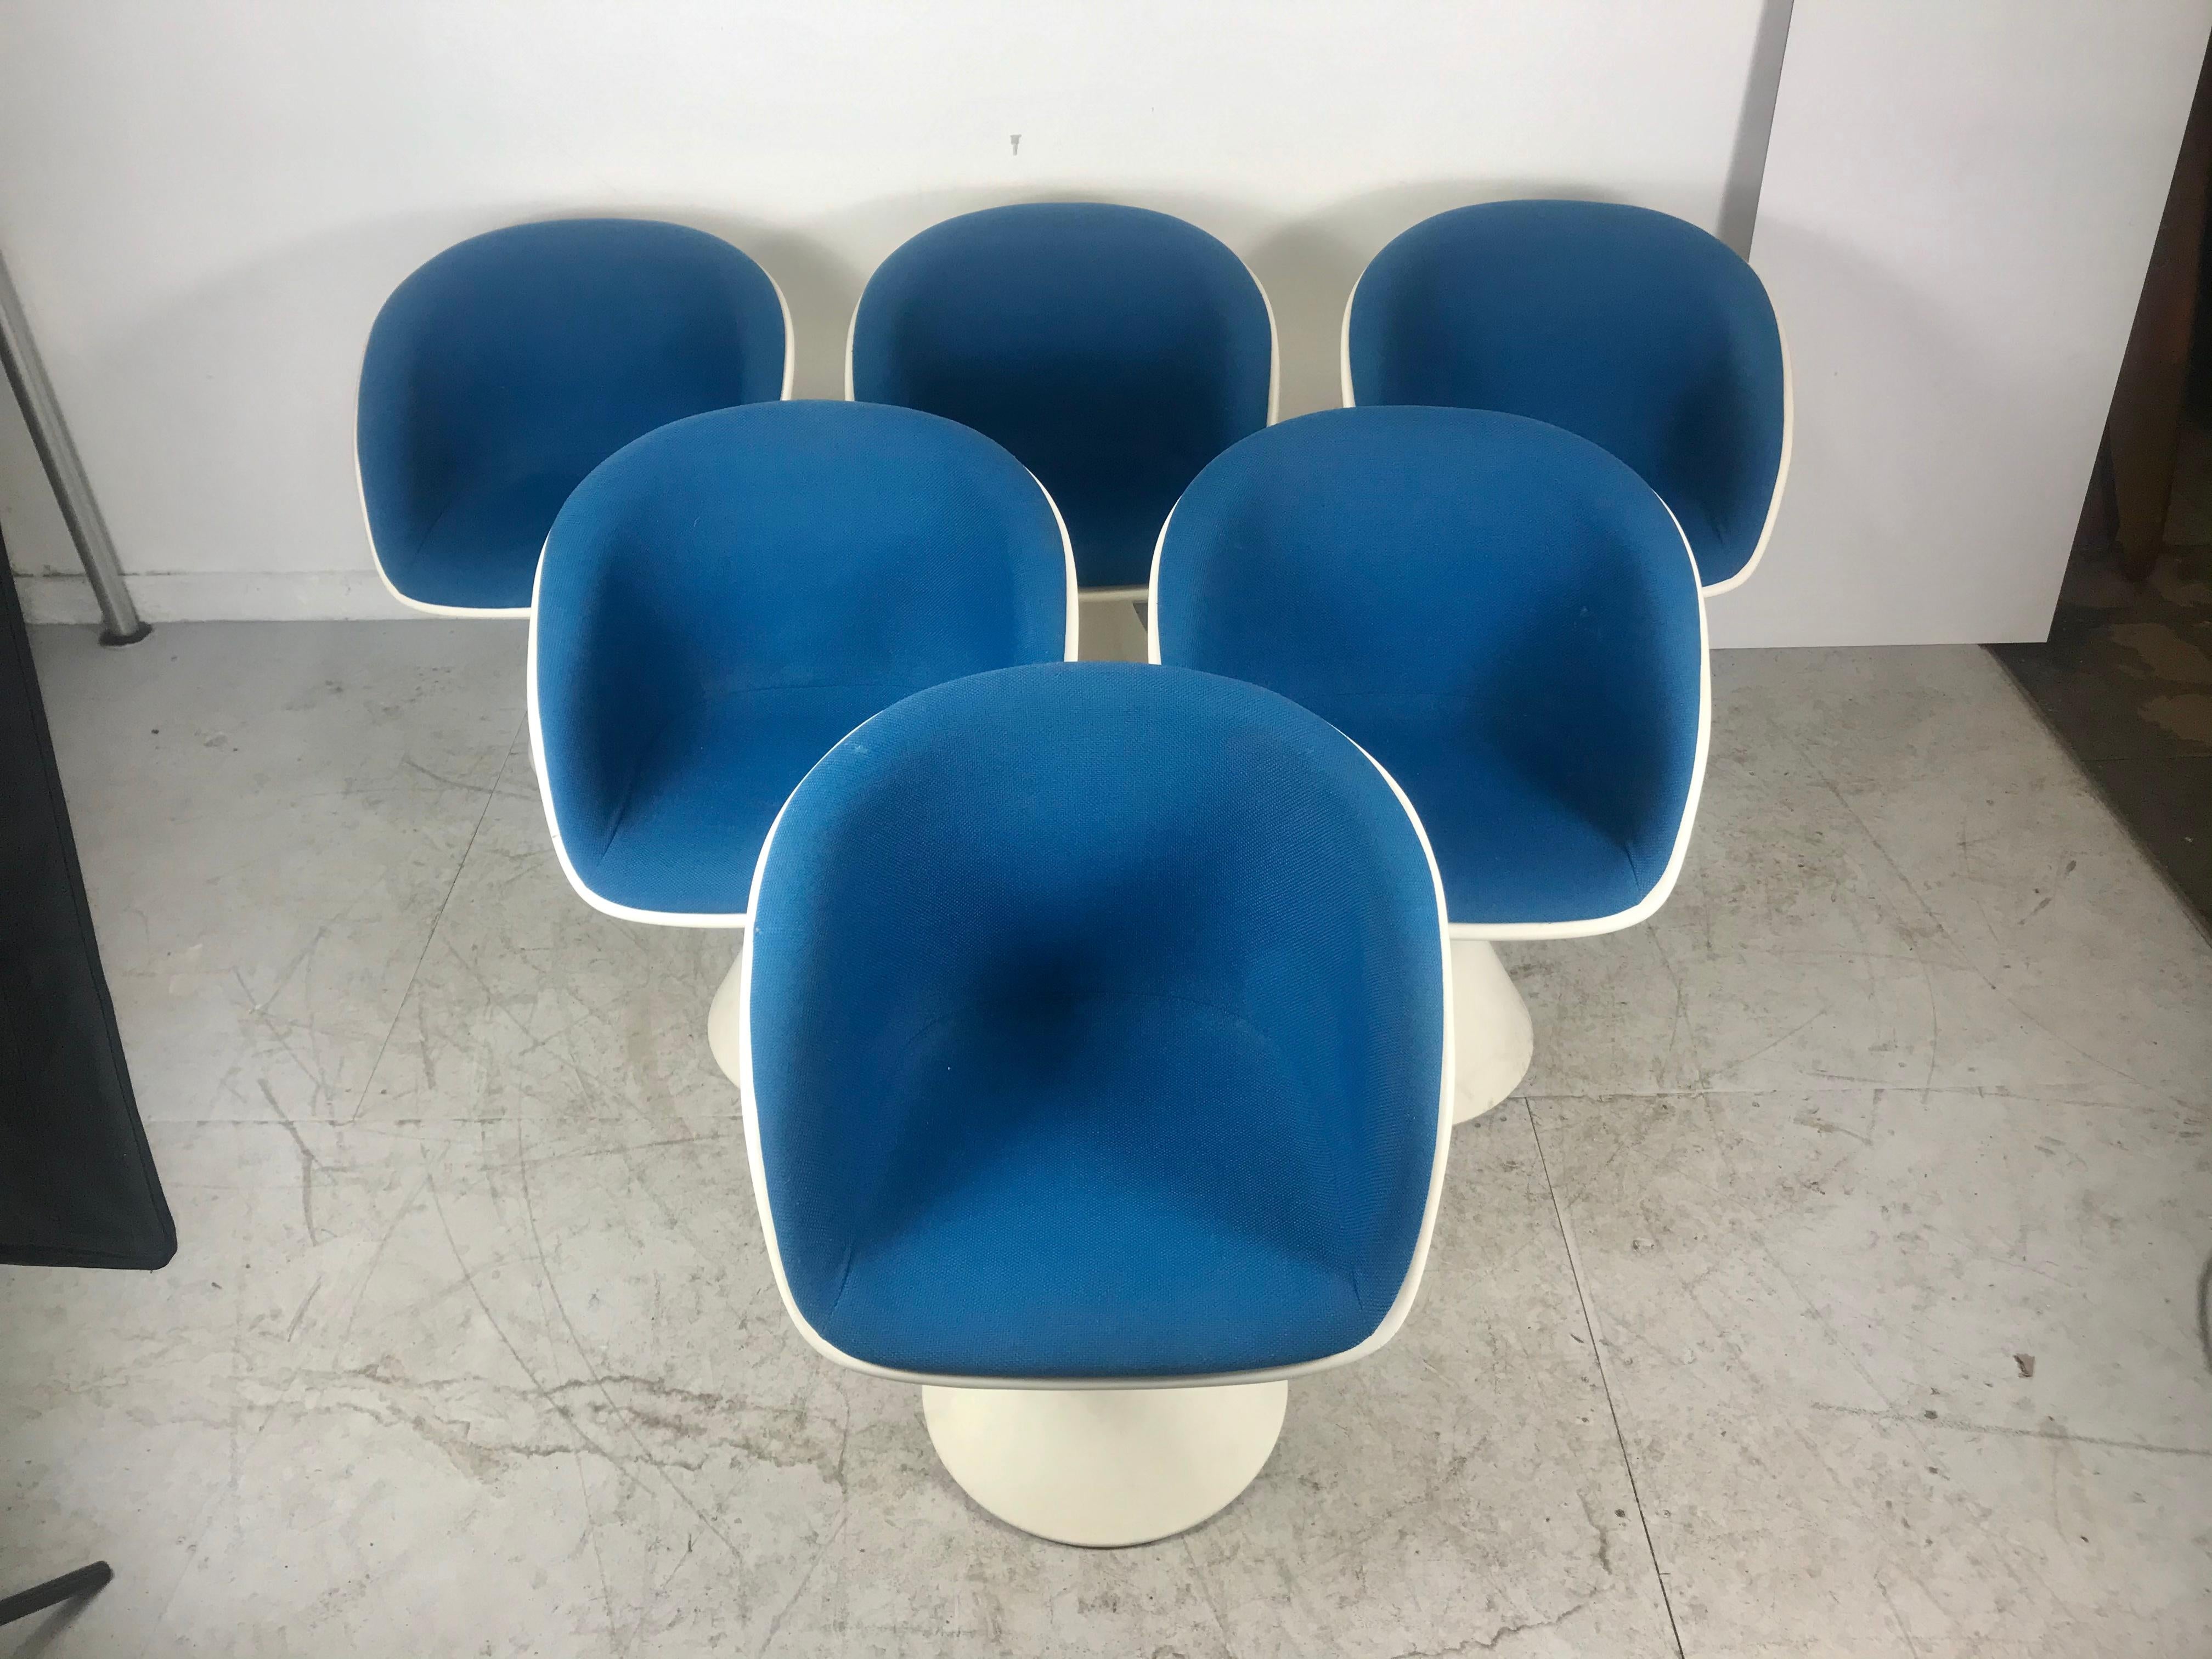 space age chairs